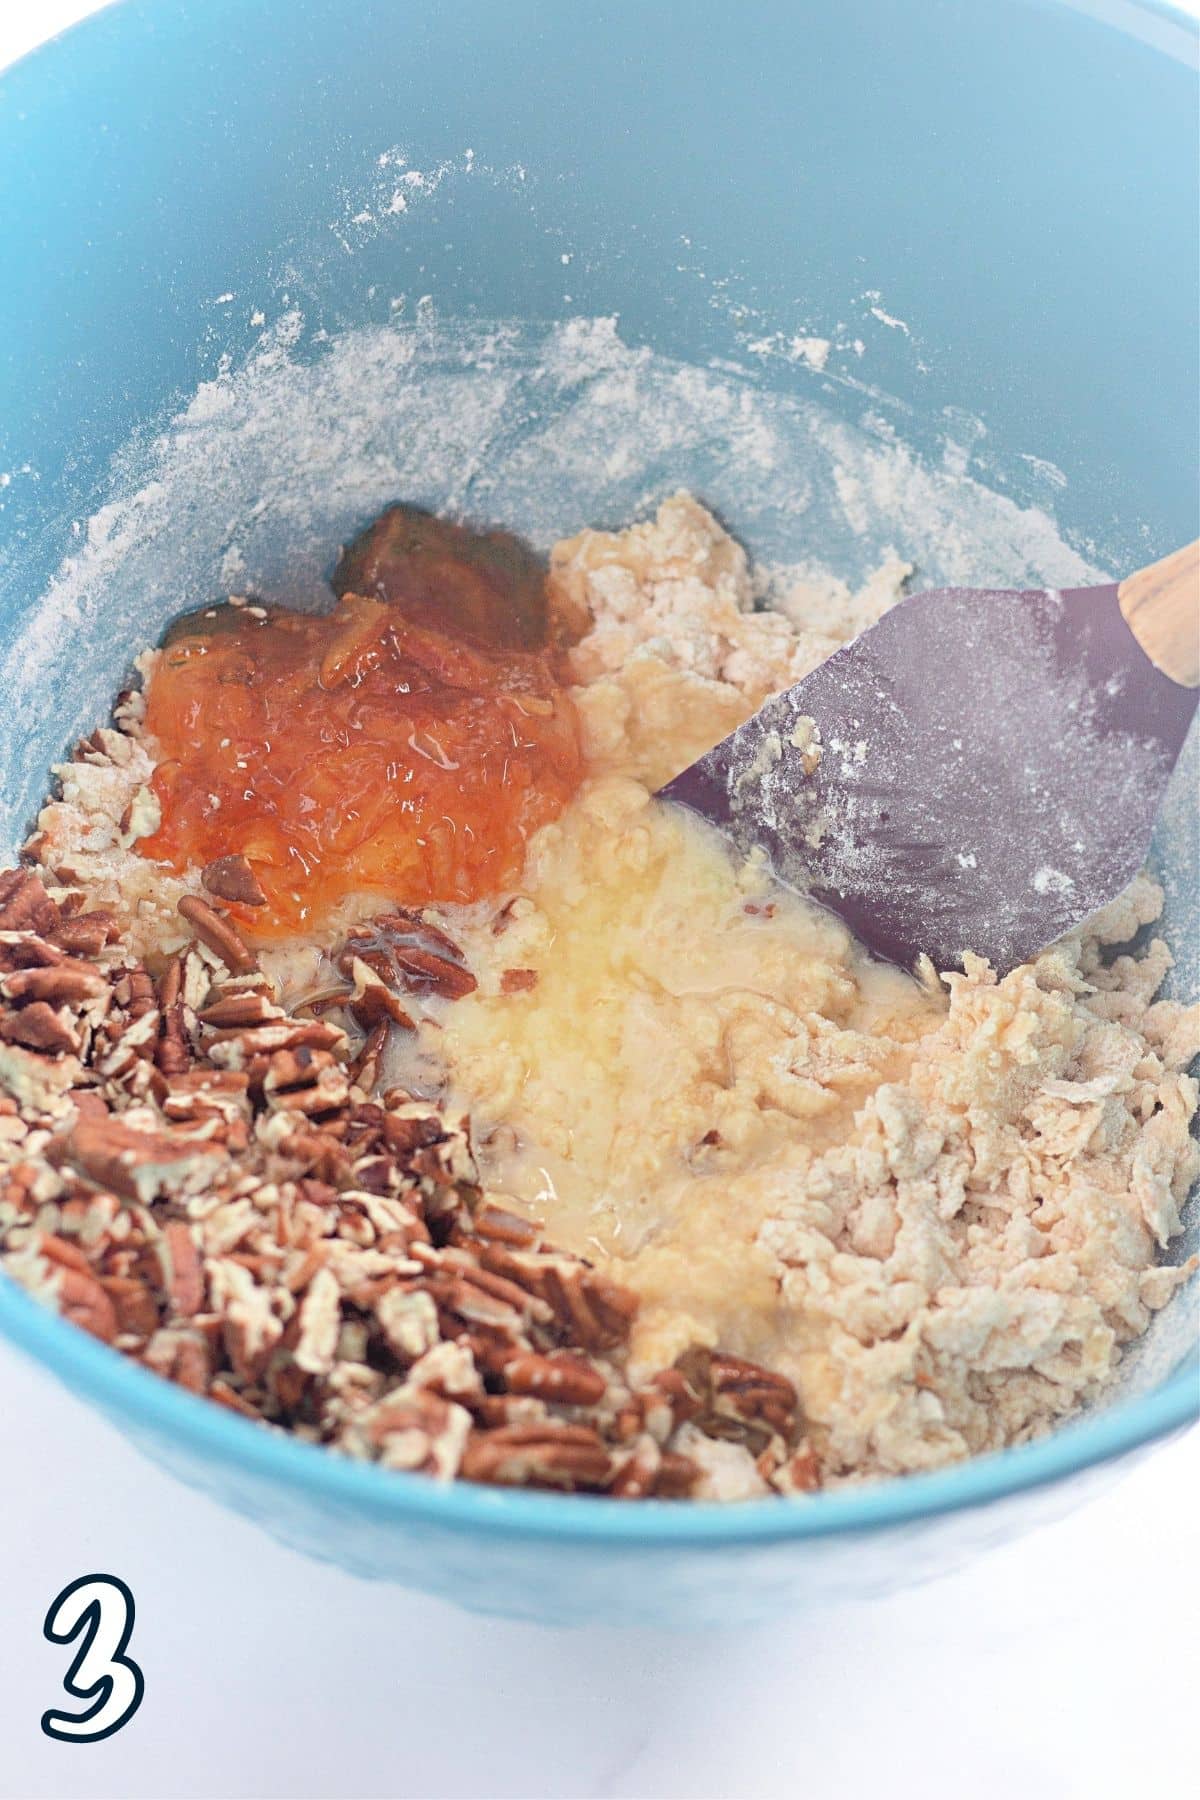 Orange marmalade and chopped pecans added to orange bread batter. 